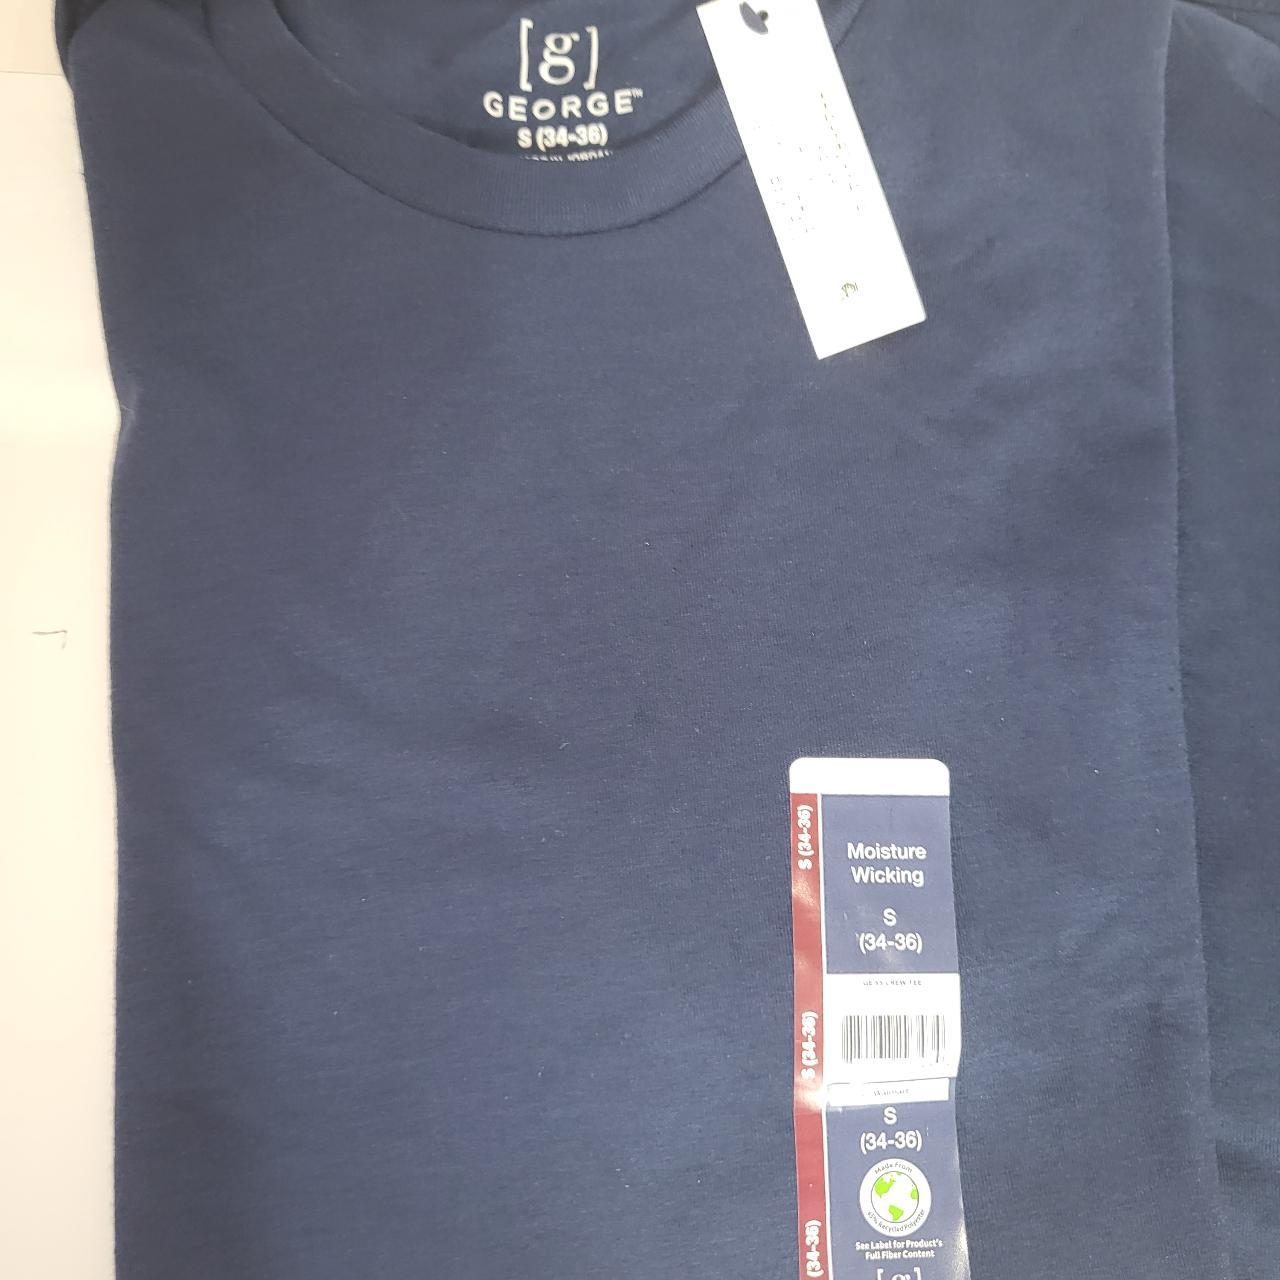 3 George pack Mens size small navy blue tshirts... - Depop